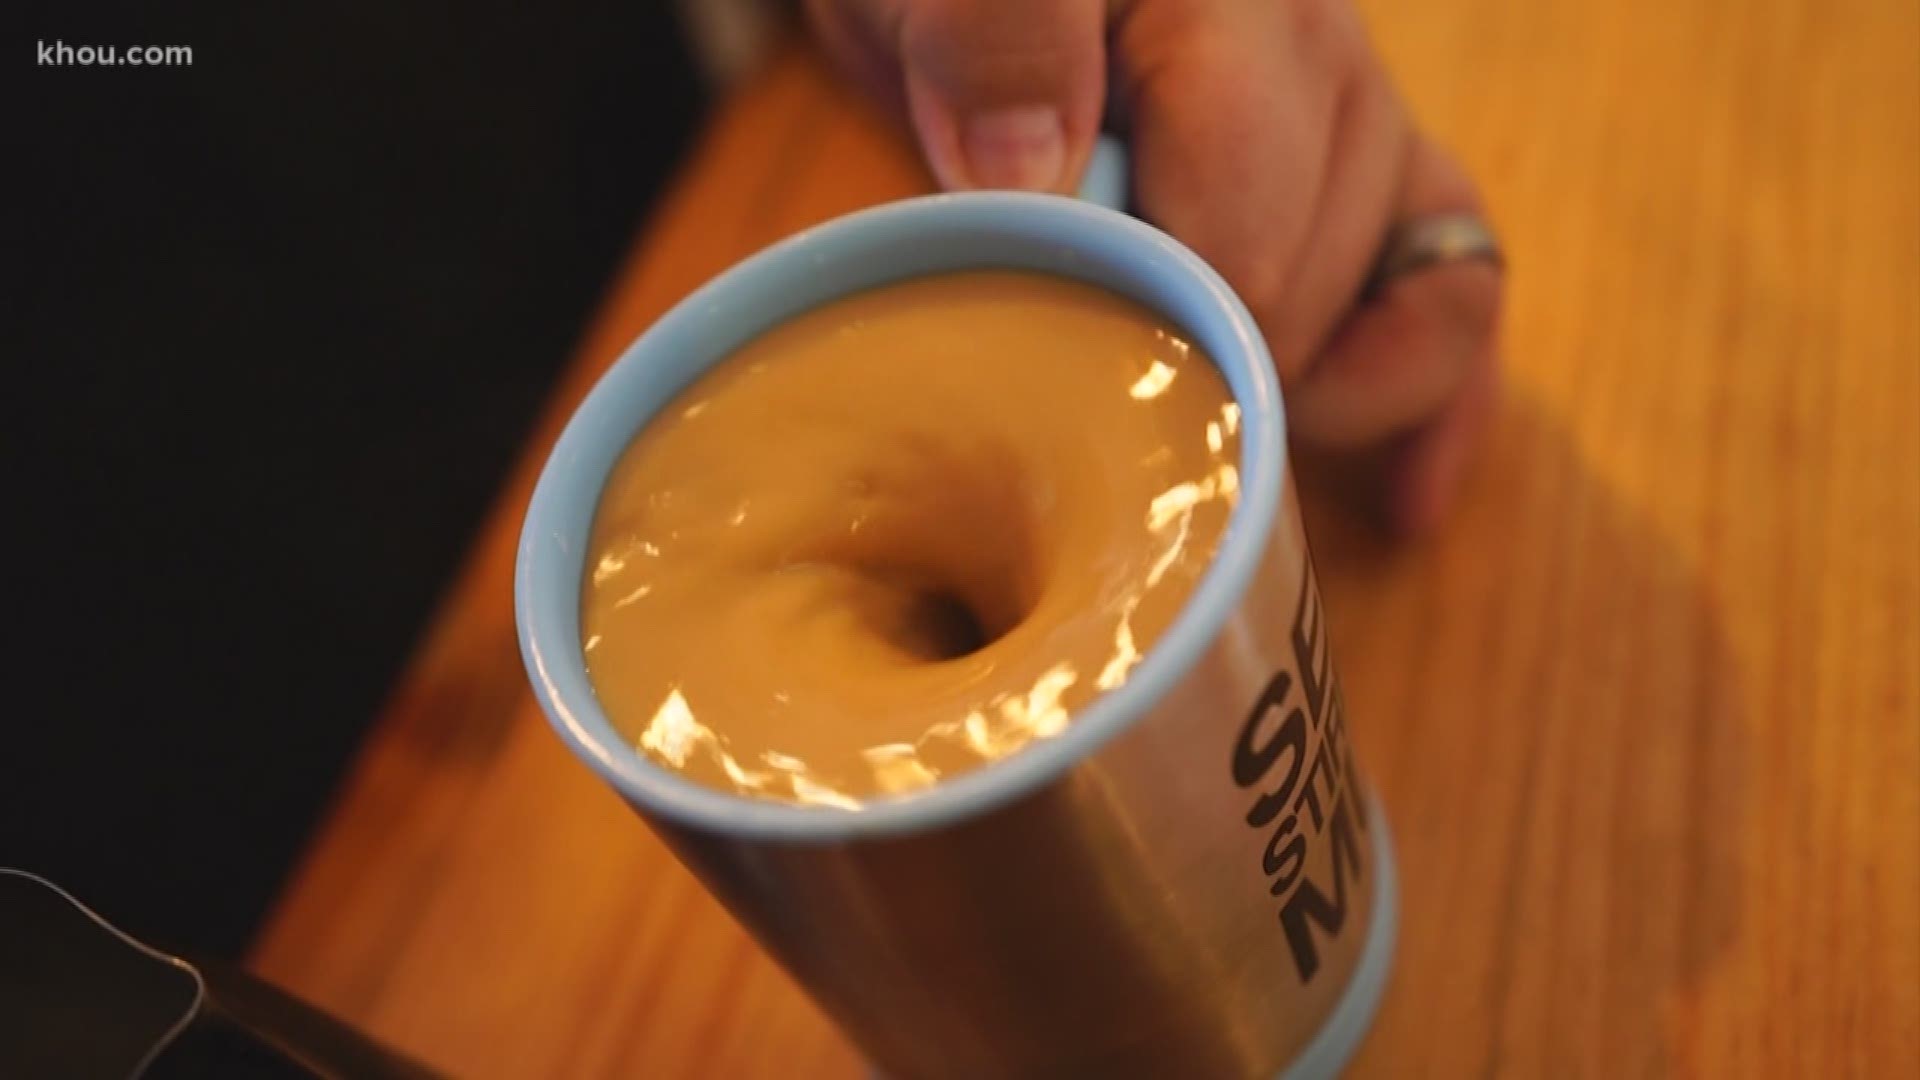 Preparing your morning cup of coffee just got easier. There's a self-stirring mug that lets you add cream, sugar and then press the stir button!